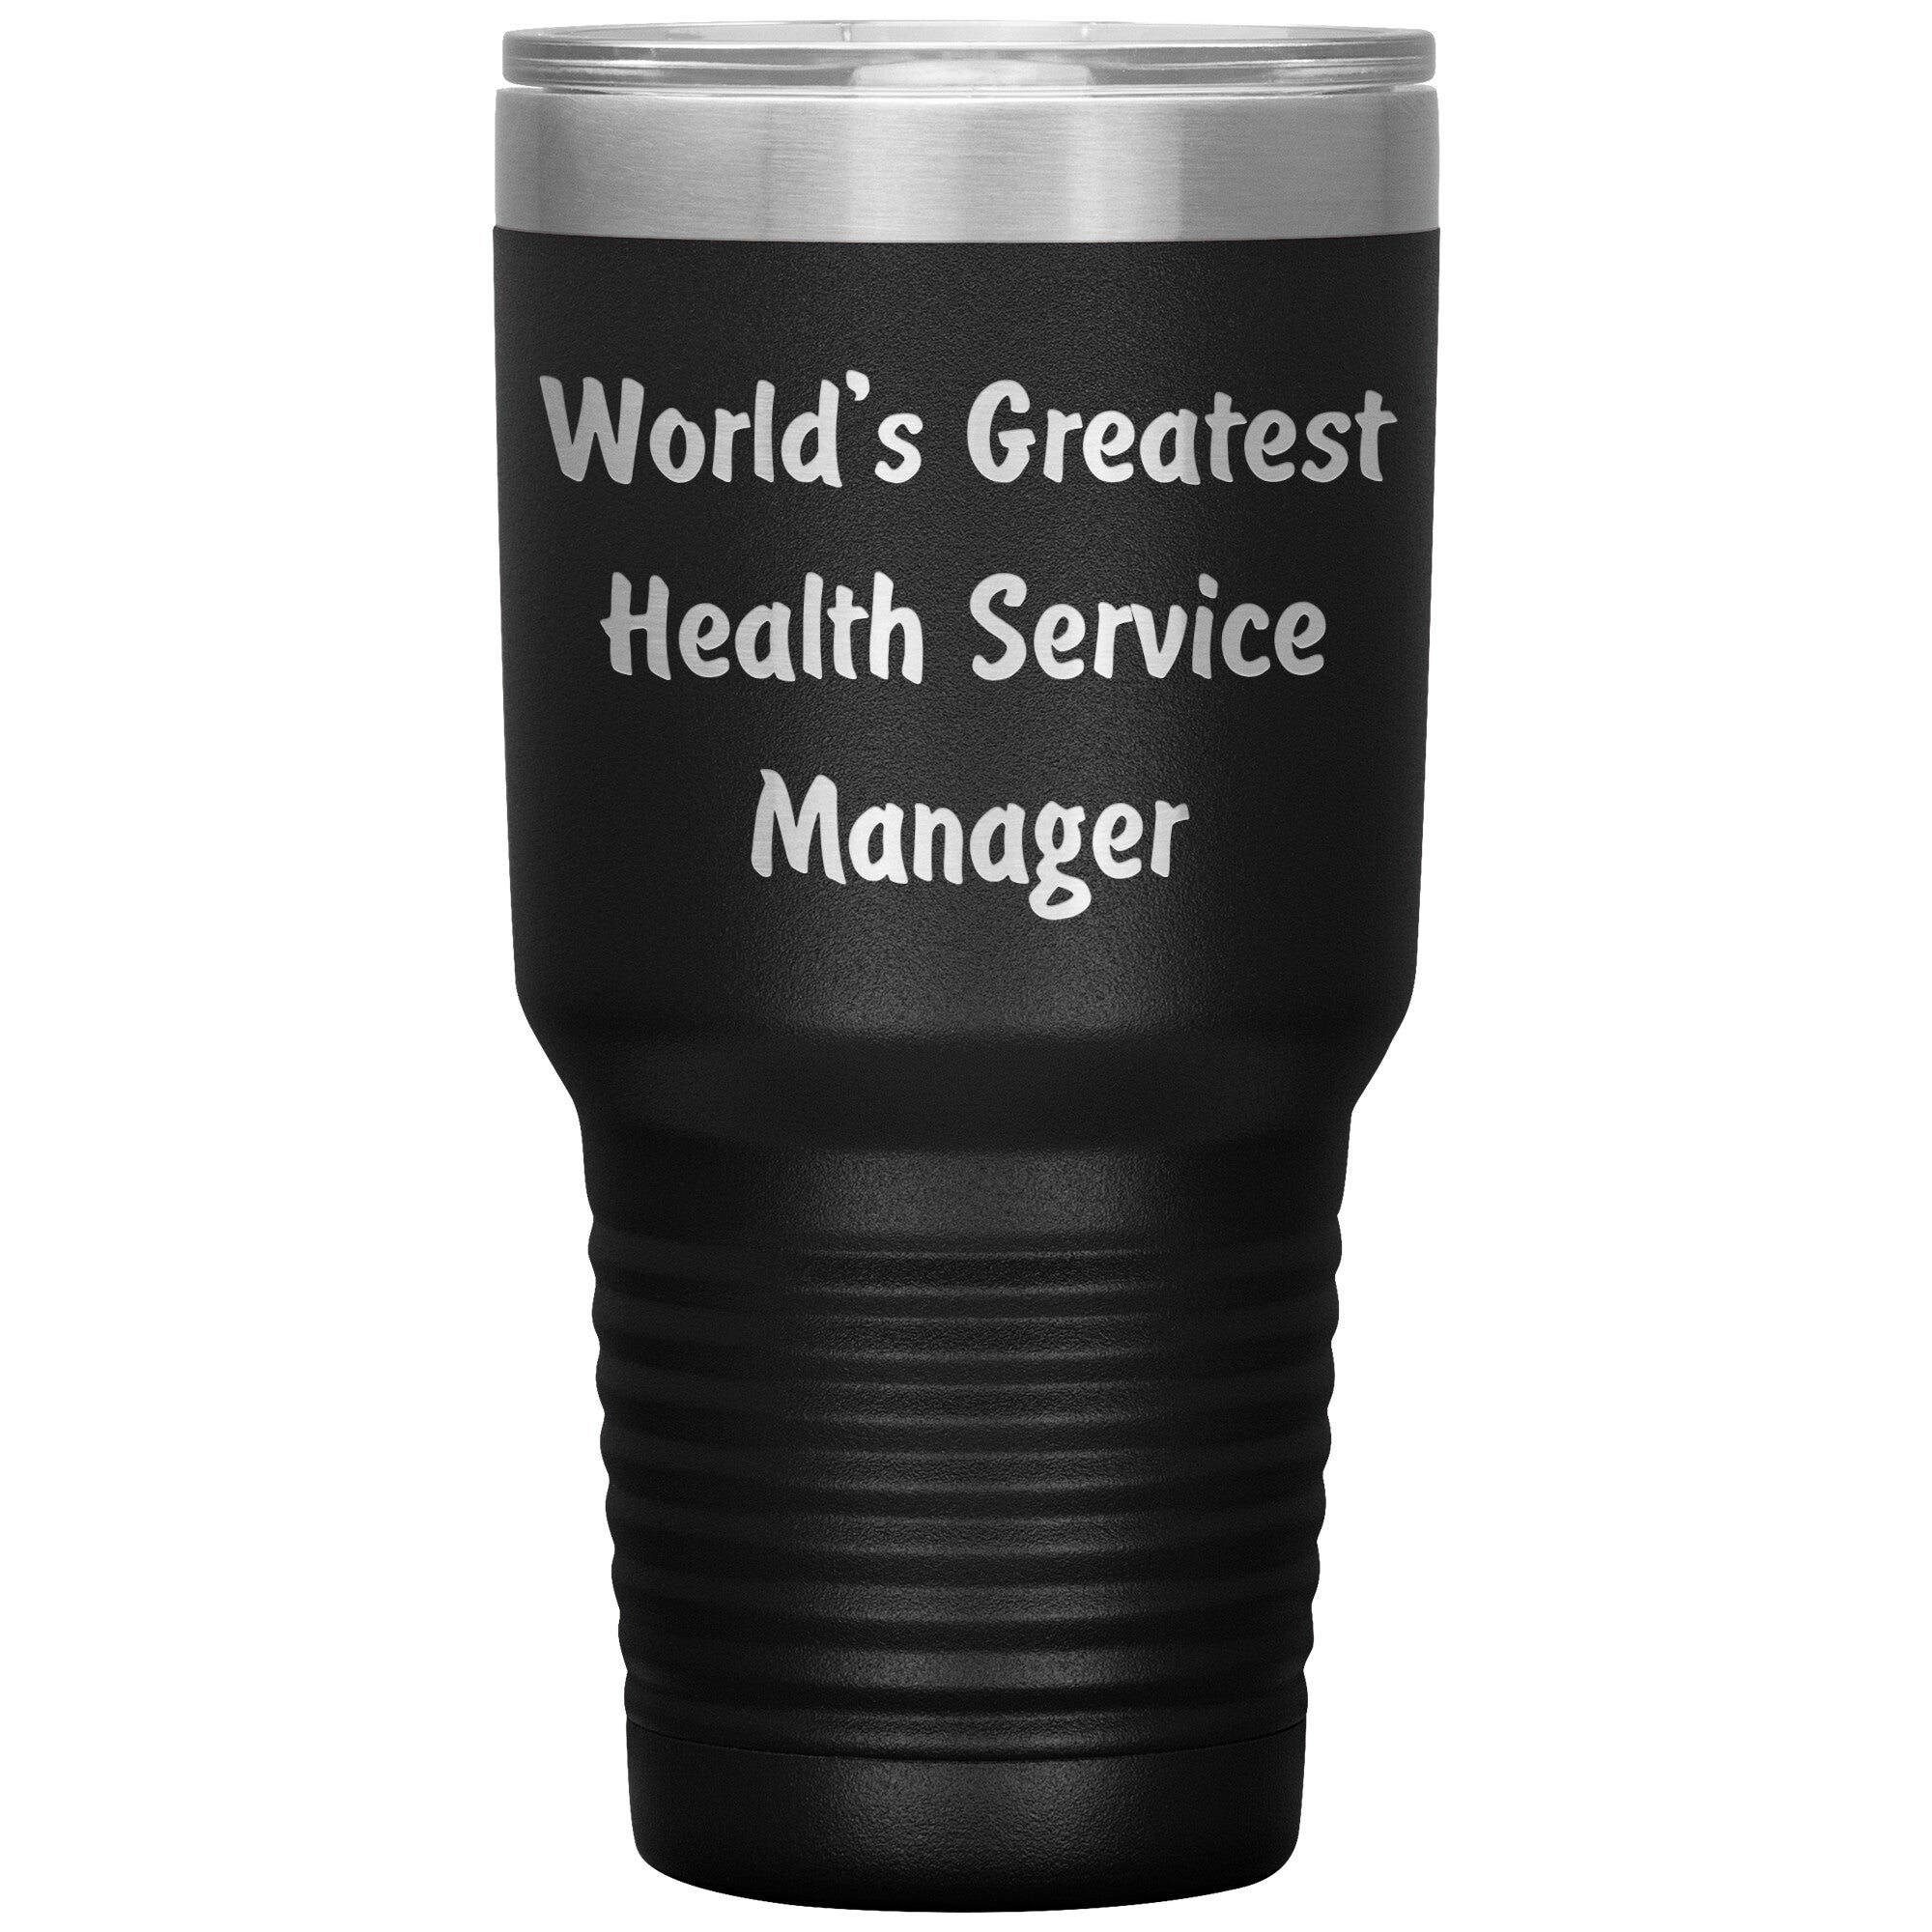 World's Greatest Health Service Manager - 30oz Insulated Tumbler